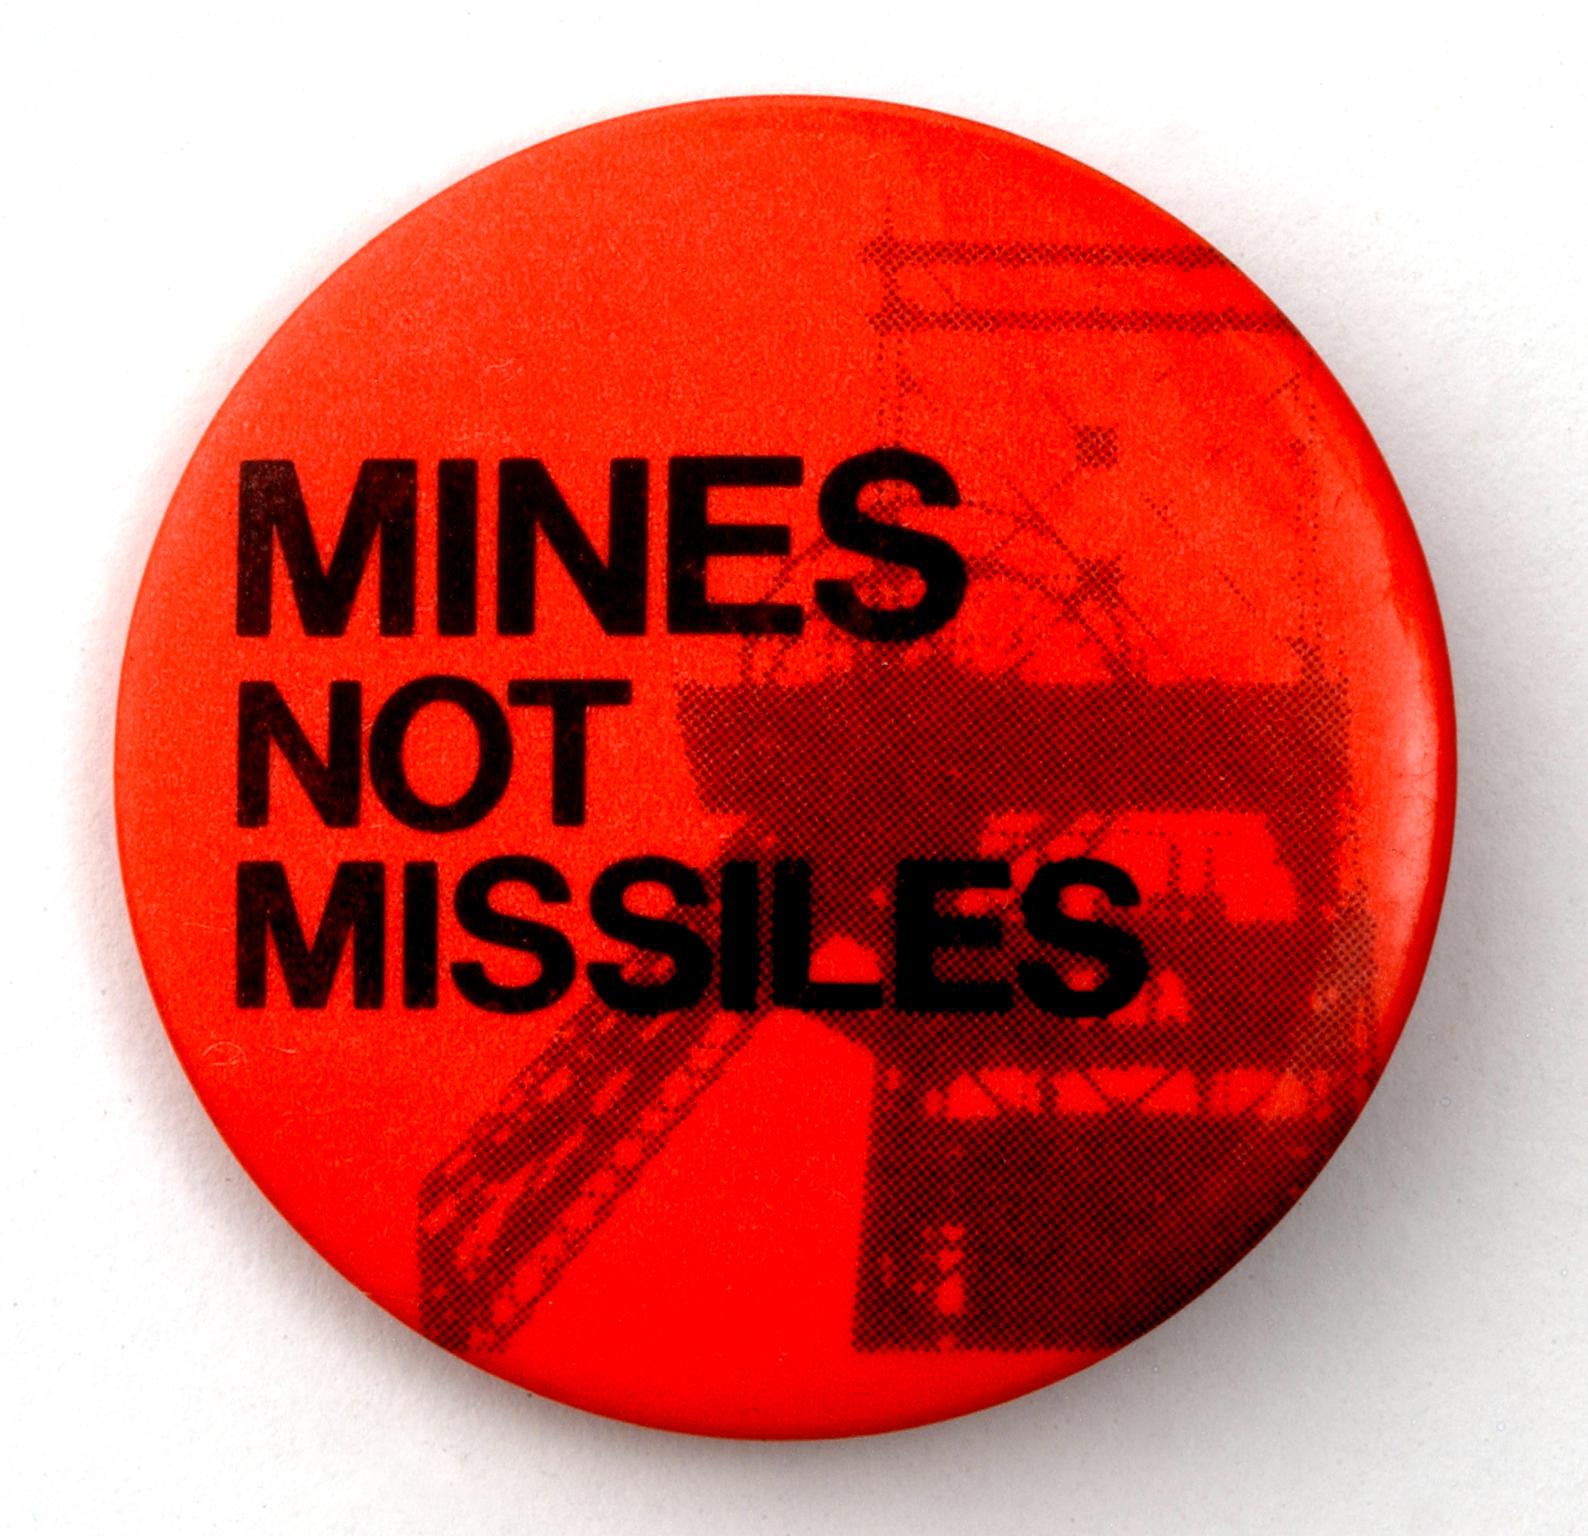 Mines Not Missiles (badge)